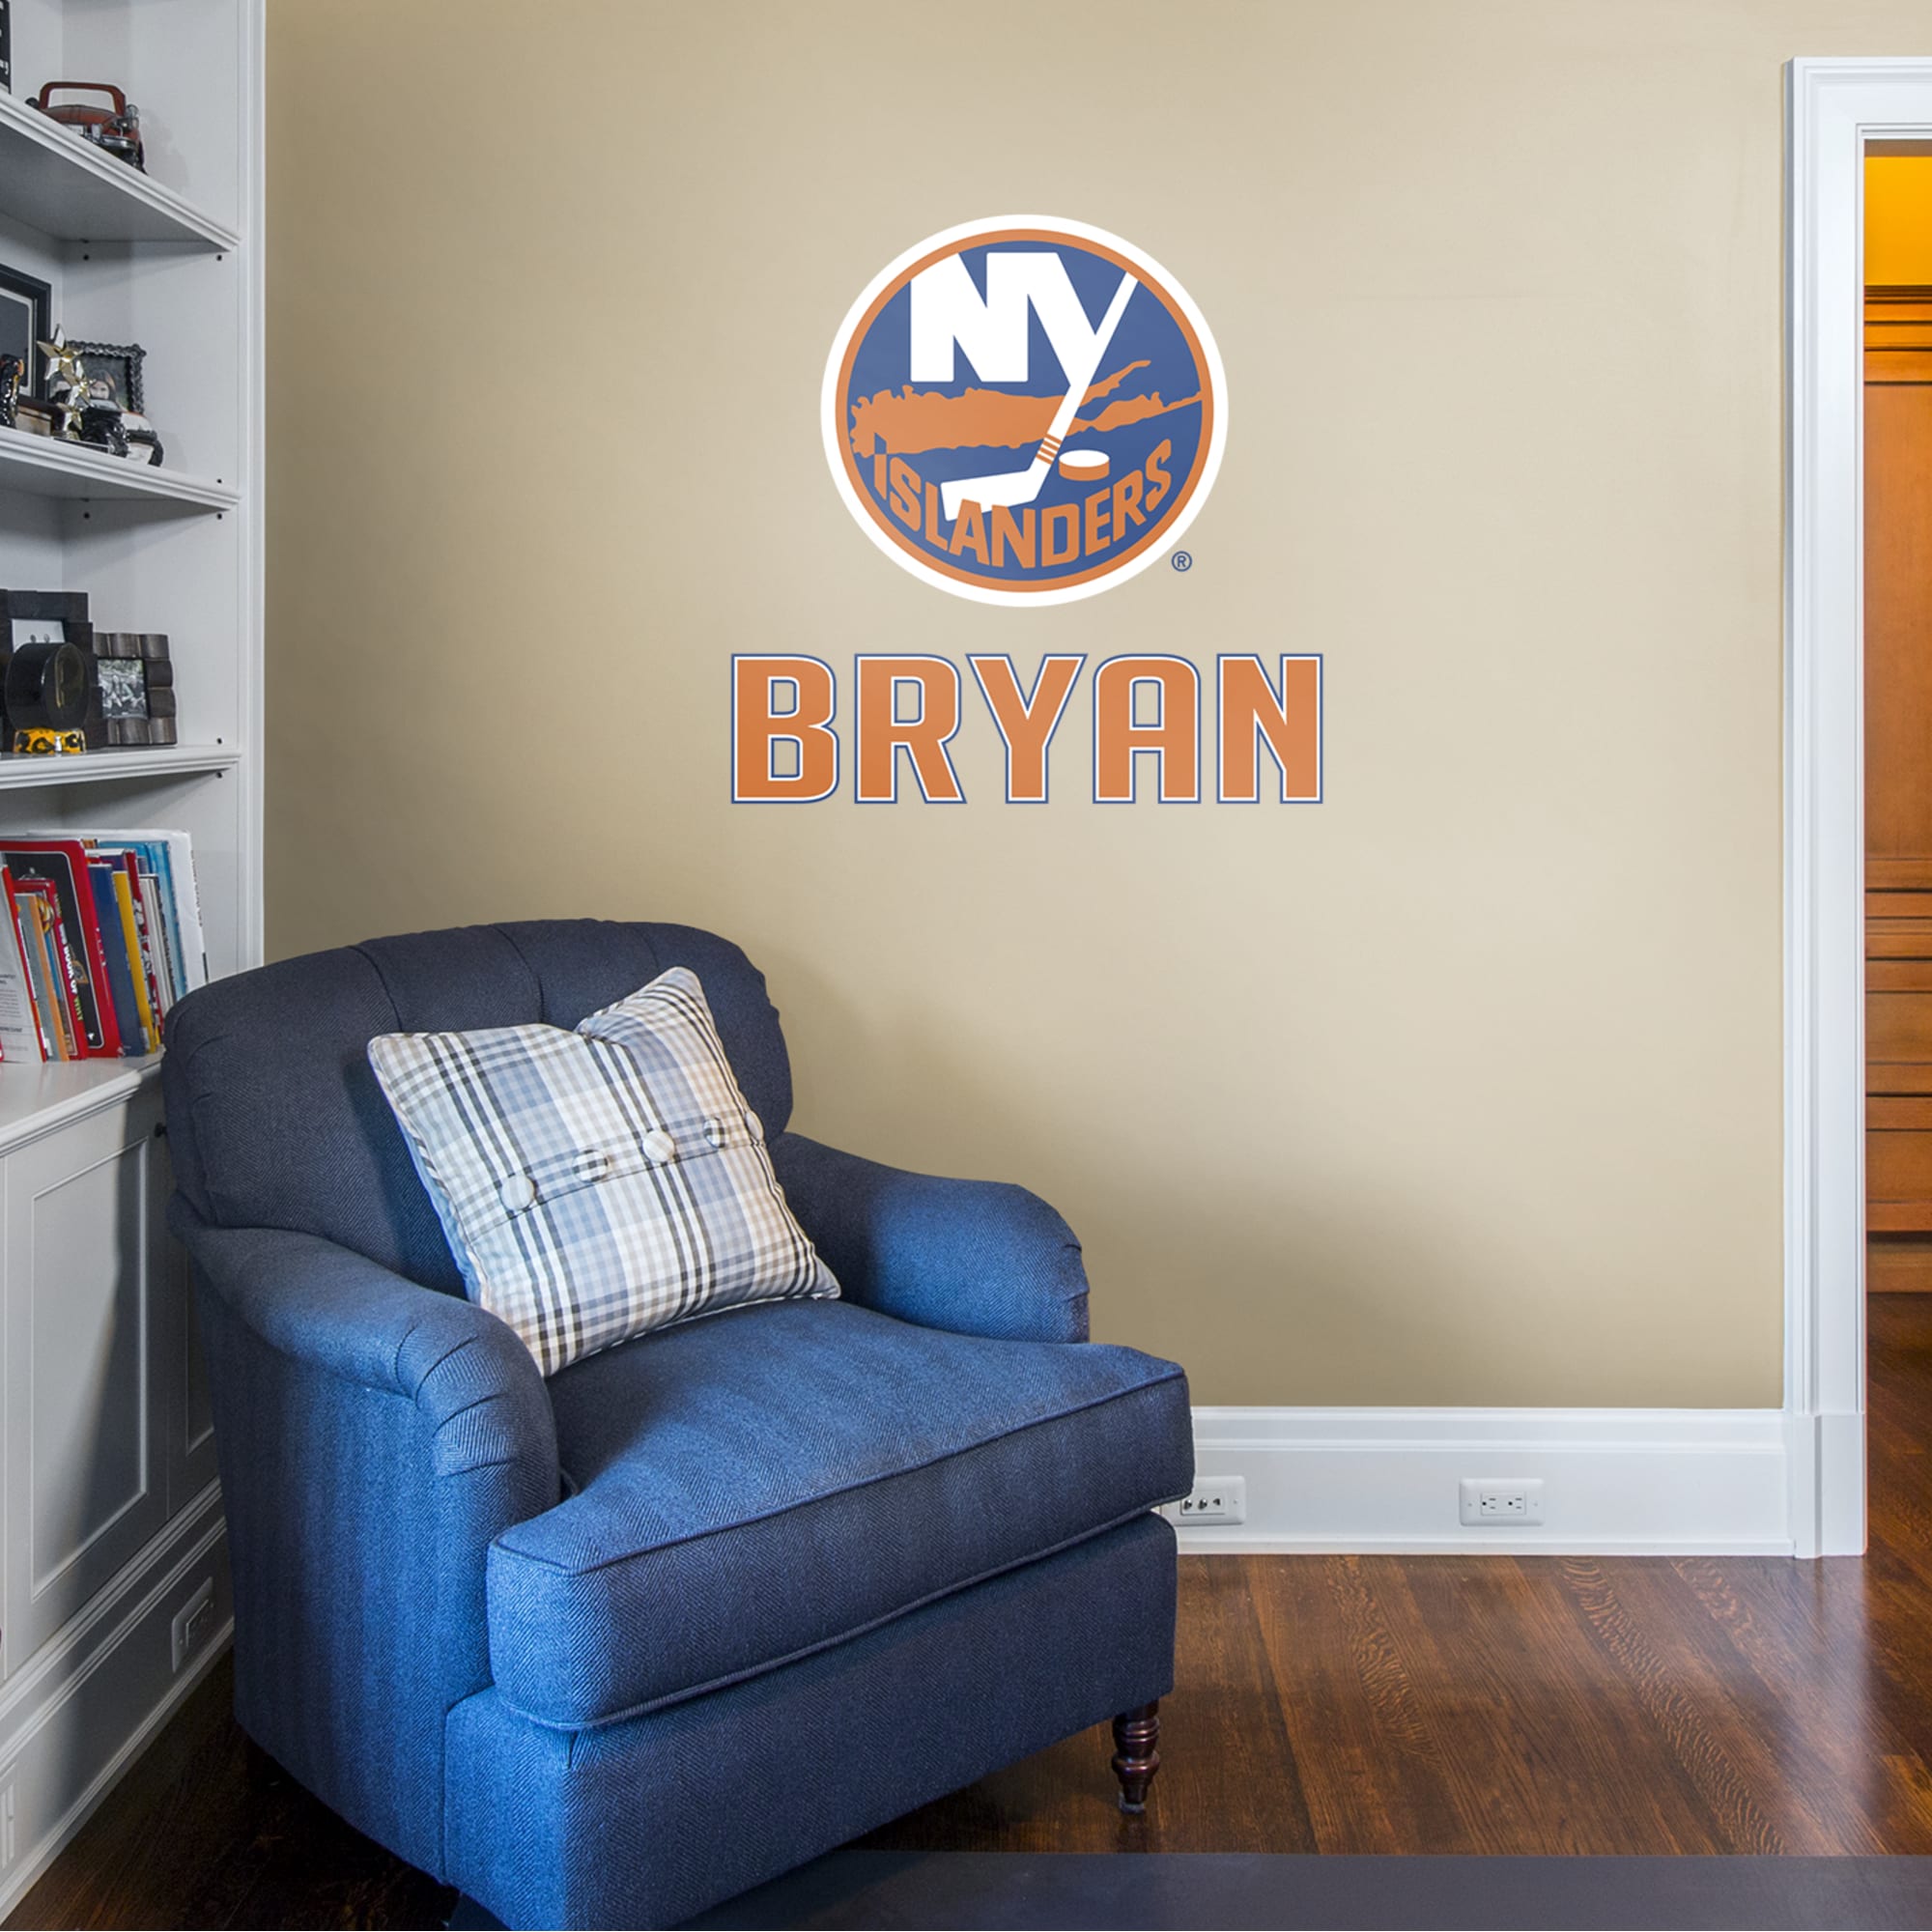 New York Islanders: Stacked Personalized Name - Officially Licensed NHL Transfer Decal in Orange (39.5"W x 52"H) by Fathead | Vi